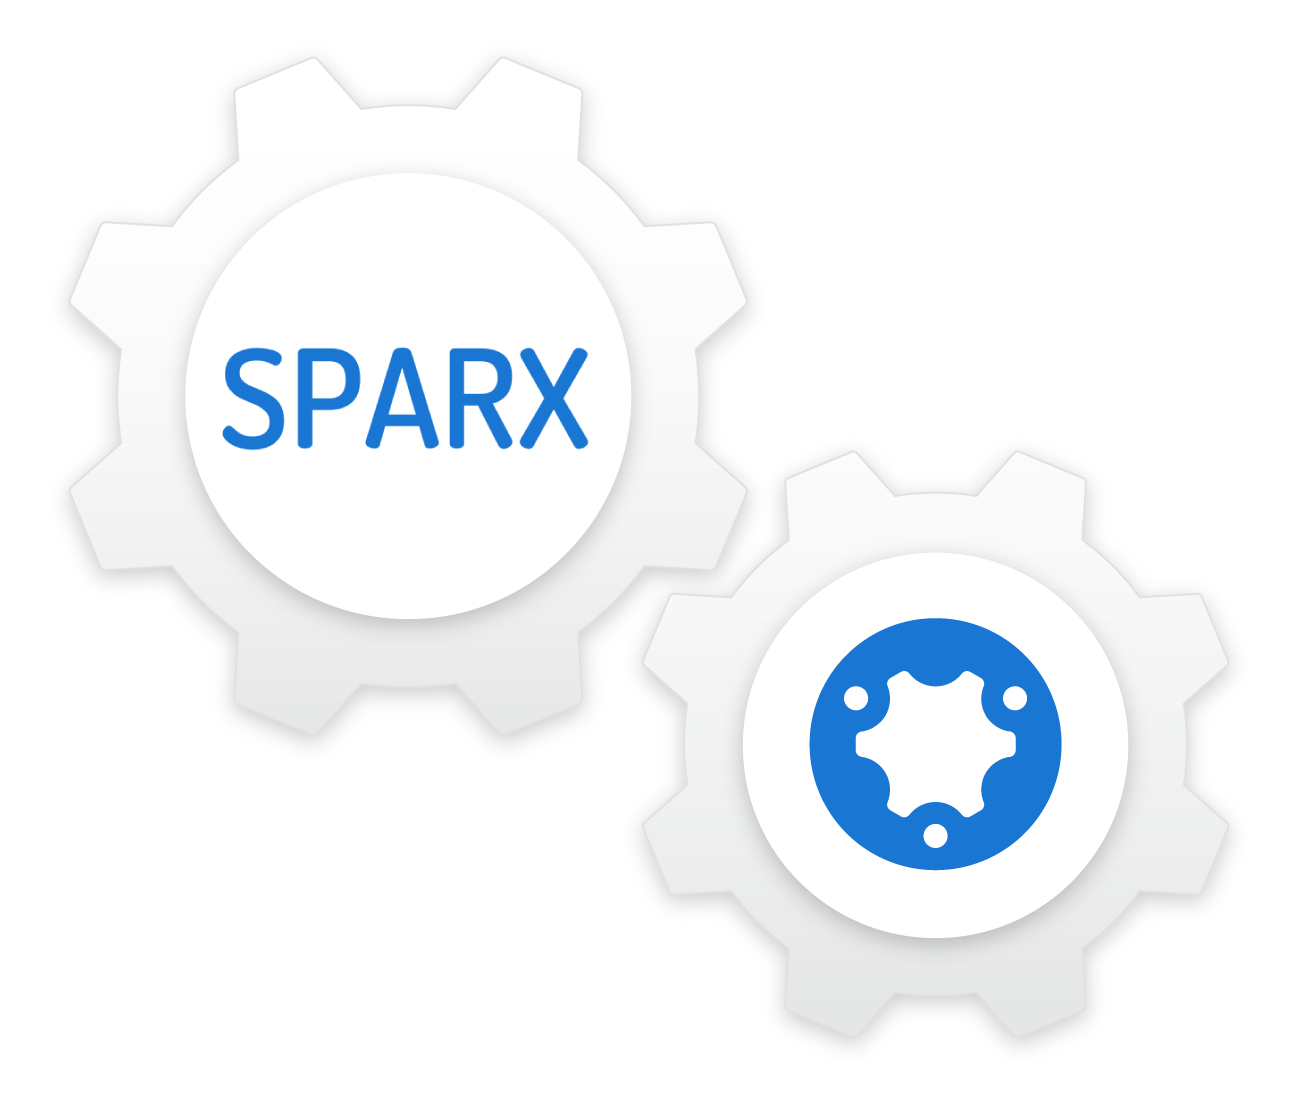 Simpro and SPARX logos integrating as gears